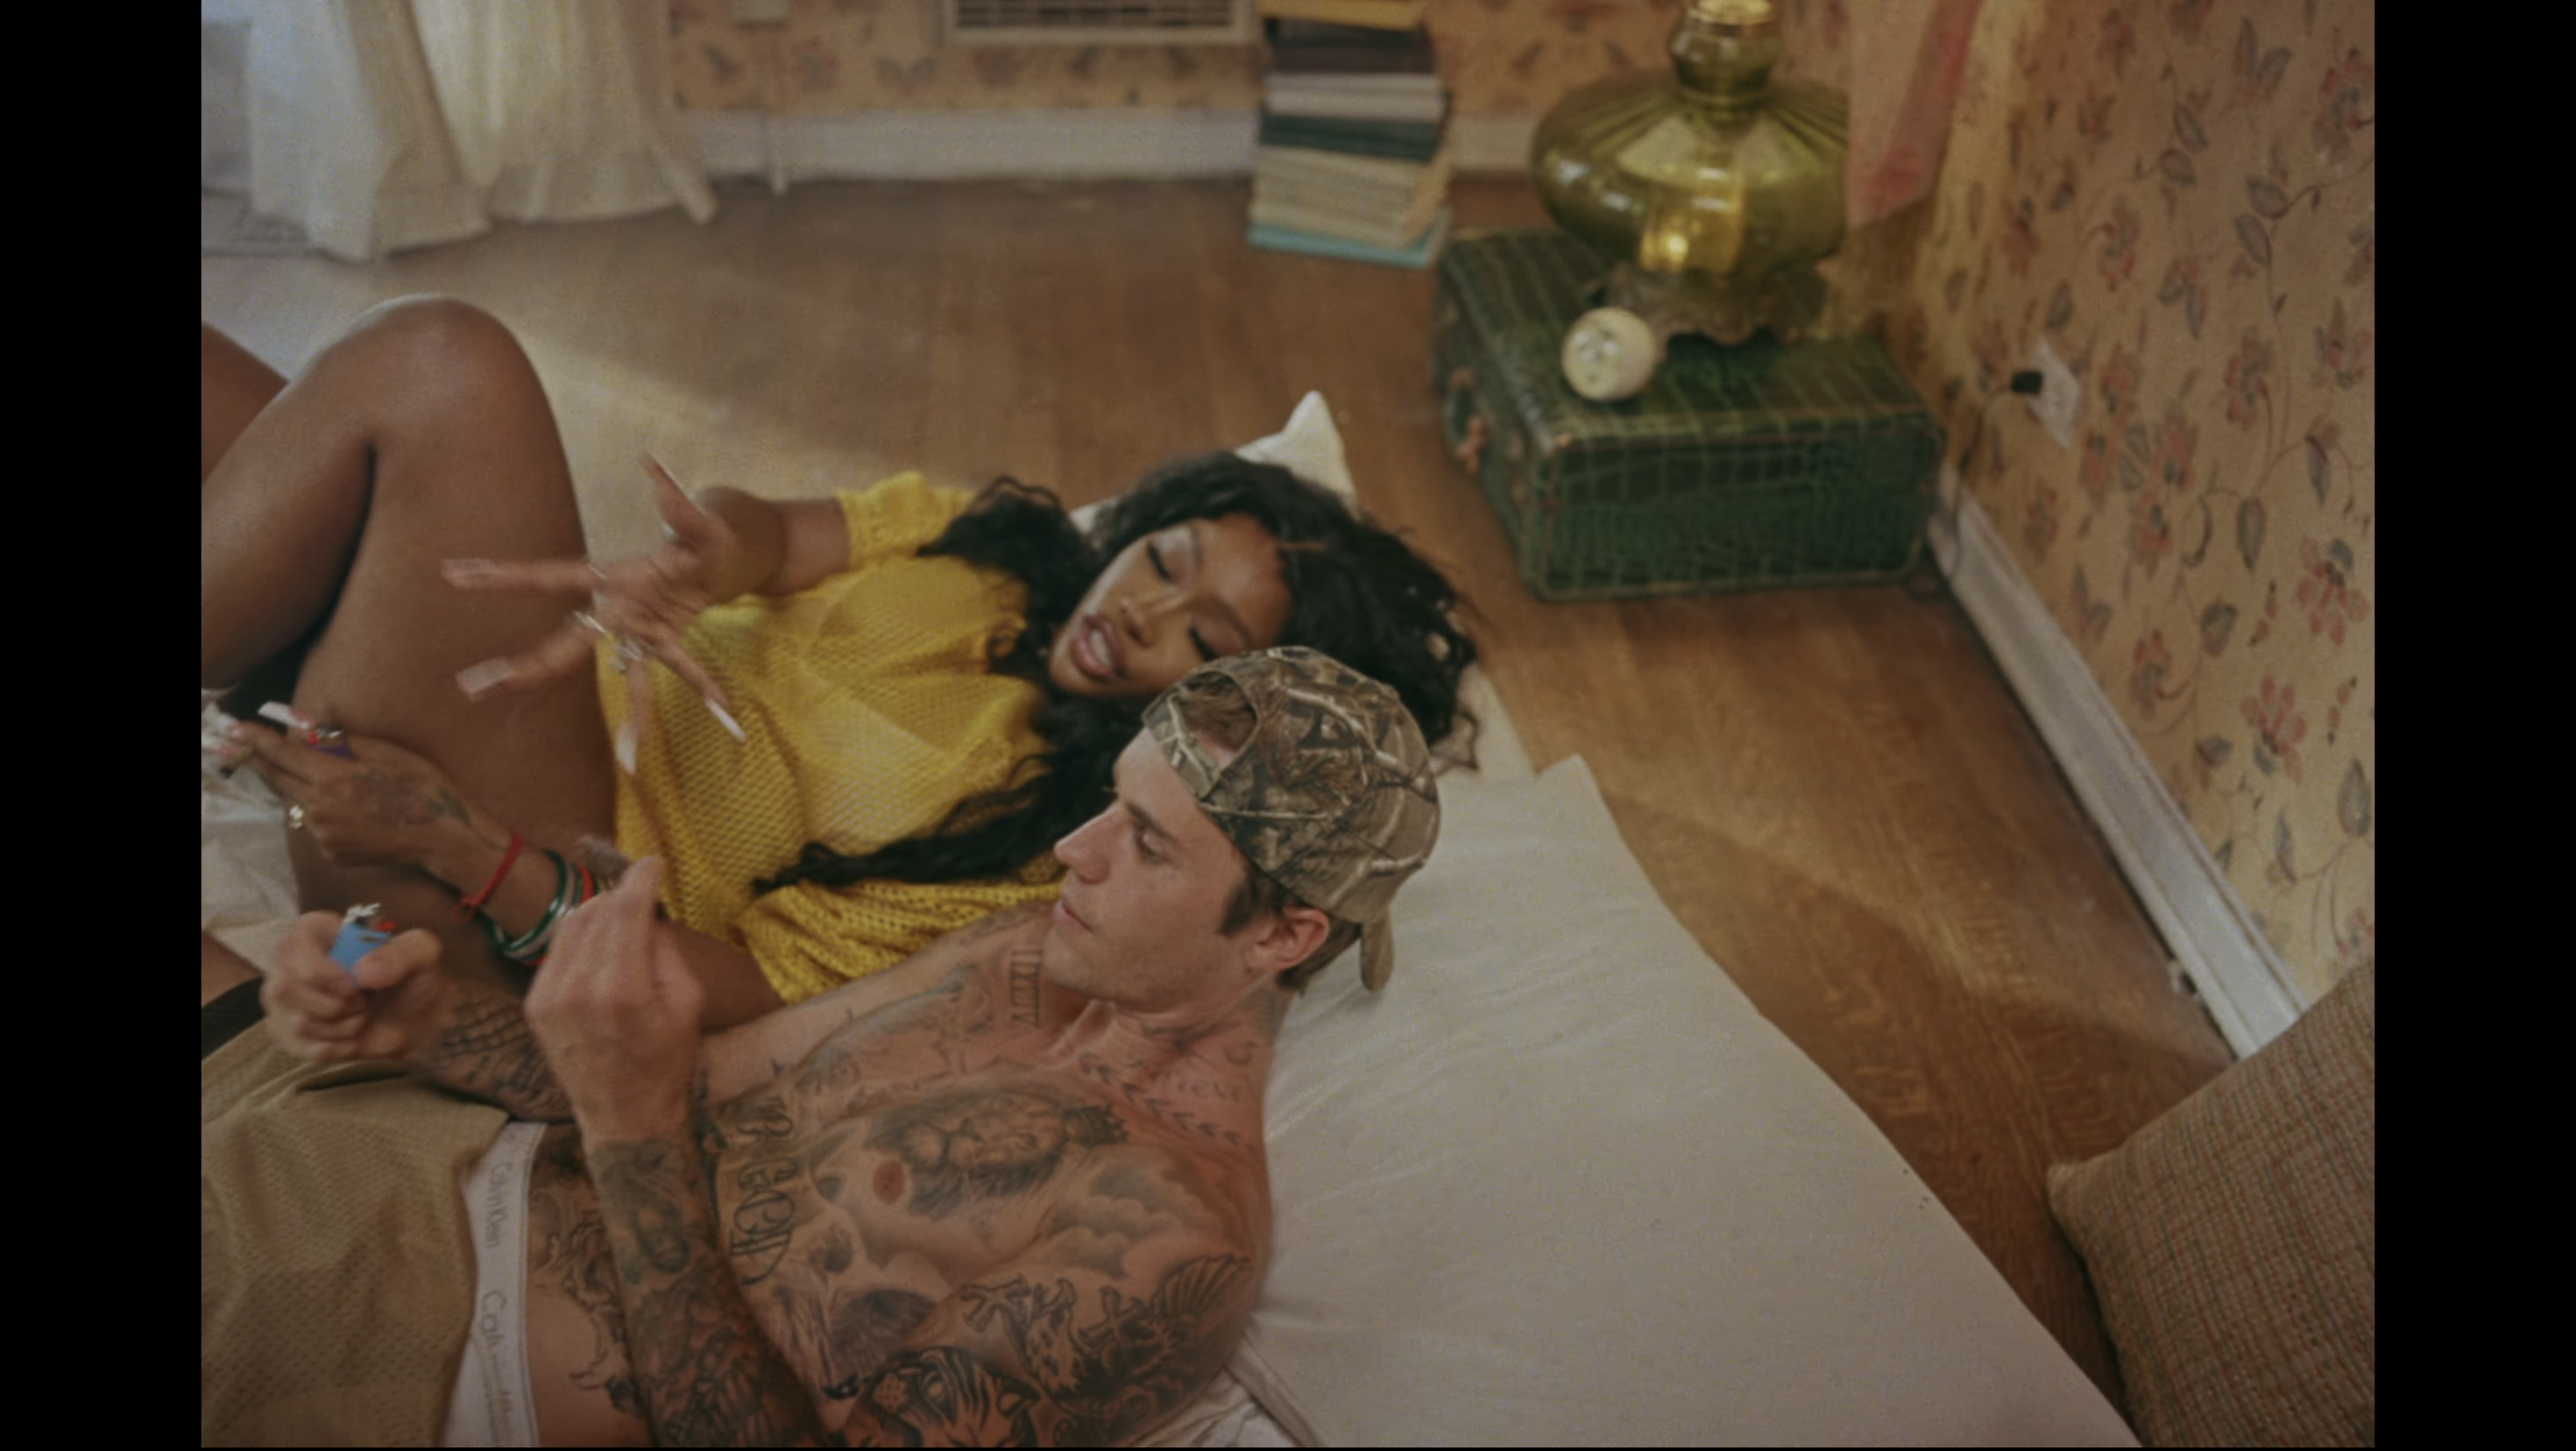 SZA and Justin lying in bed together